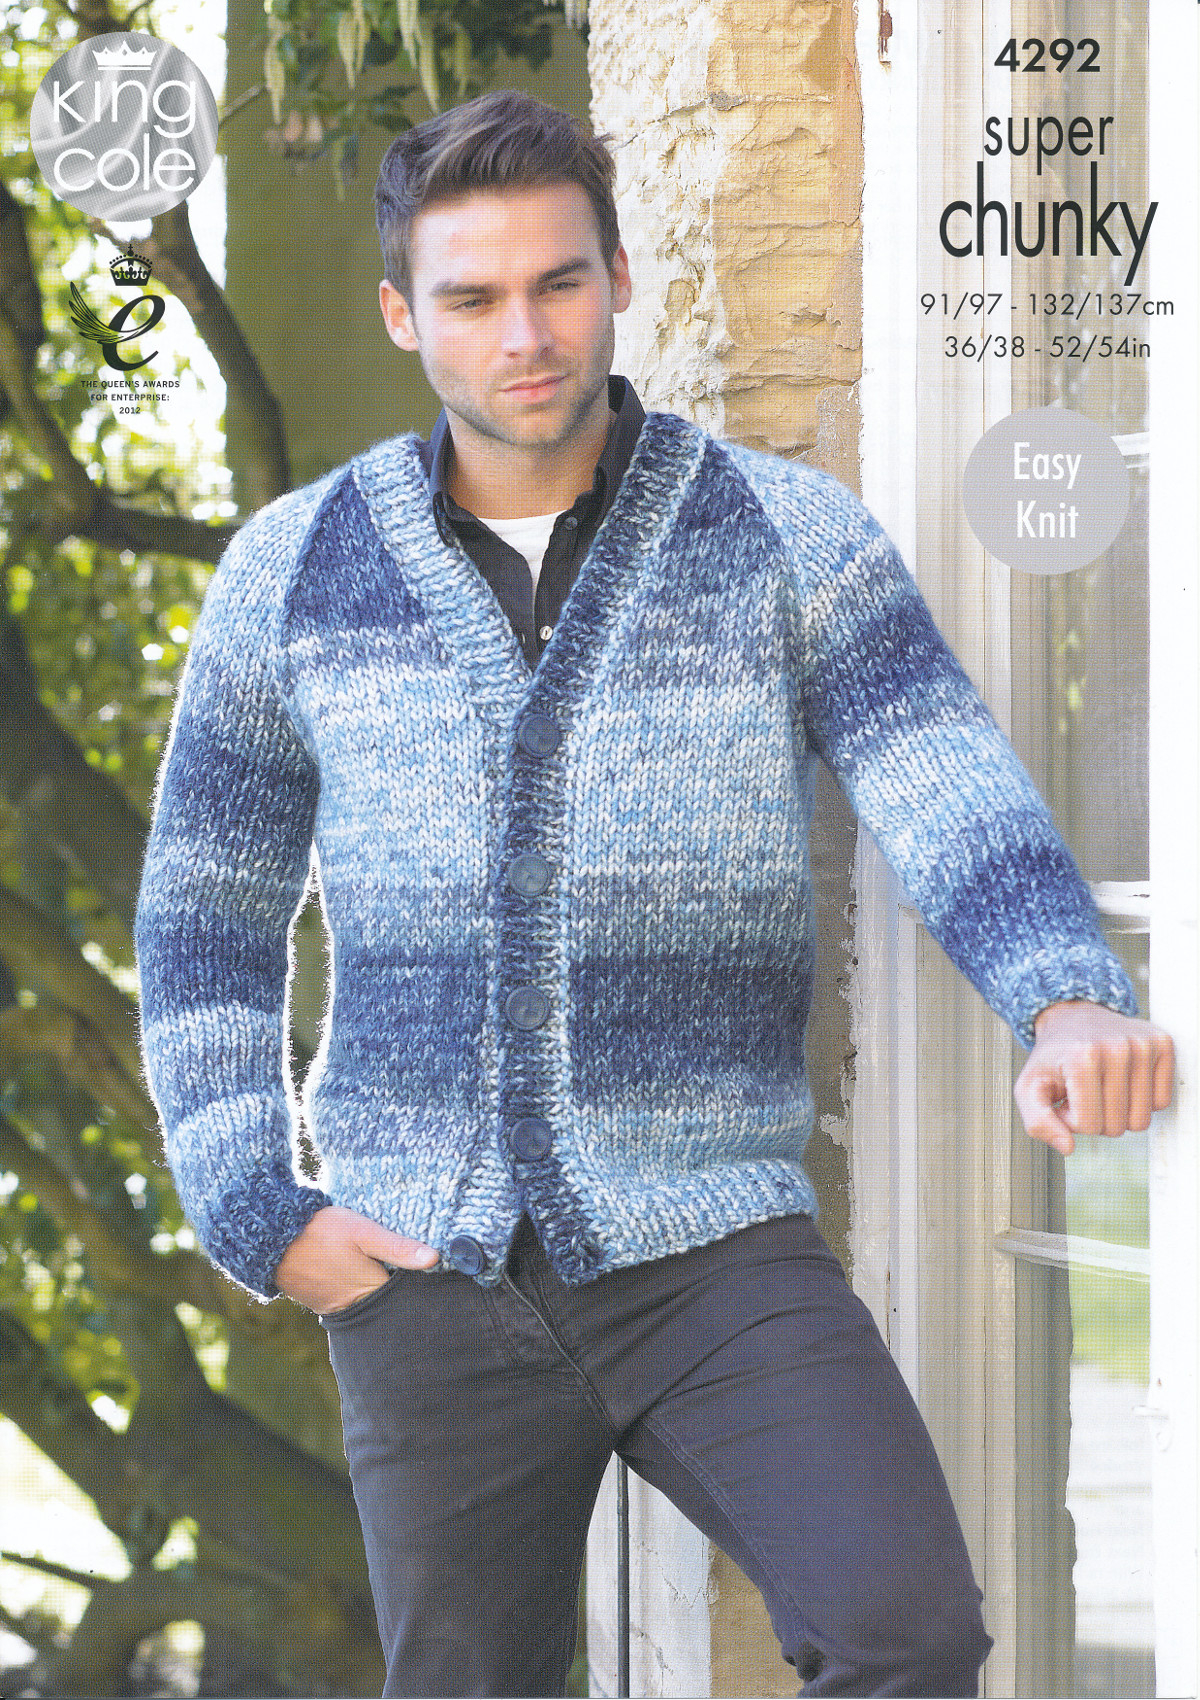 Mens Knit Patterns Details About Mens Super Chunky Knitting Pattern King Cole Easy Knit Jumper Cardigan 4292